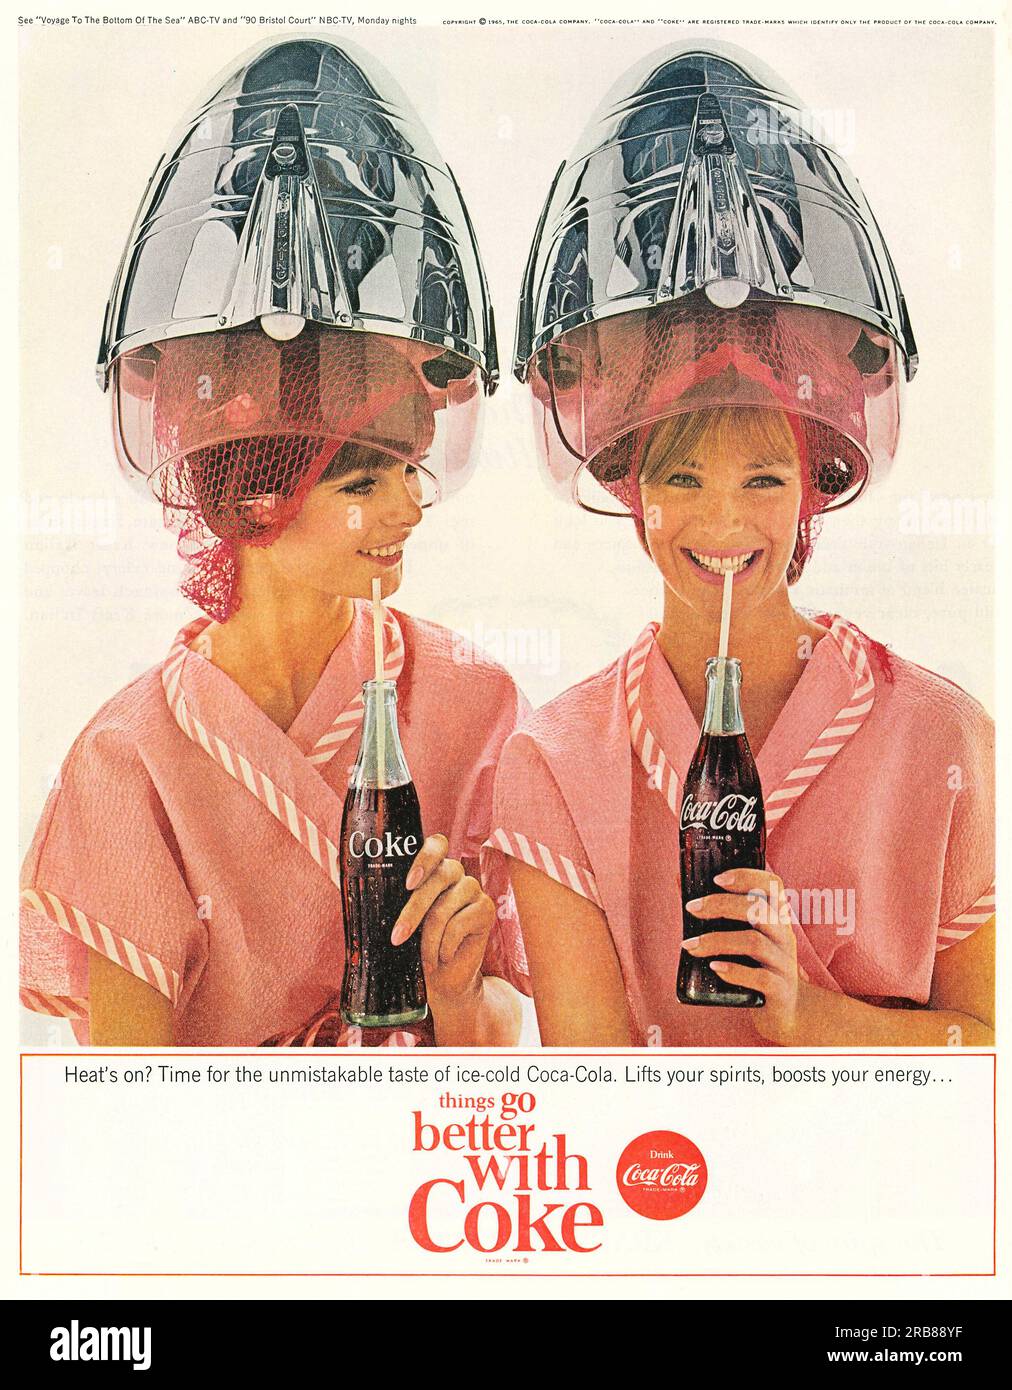 Coca Cola advertising, women in hair salon with heat cups advert in a Journal magazine, 1965. Things go better with Coke Stock Photo